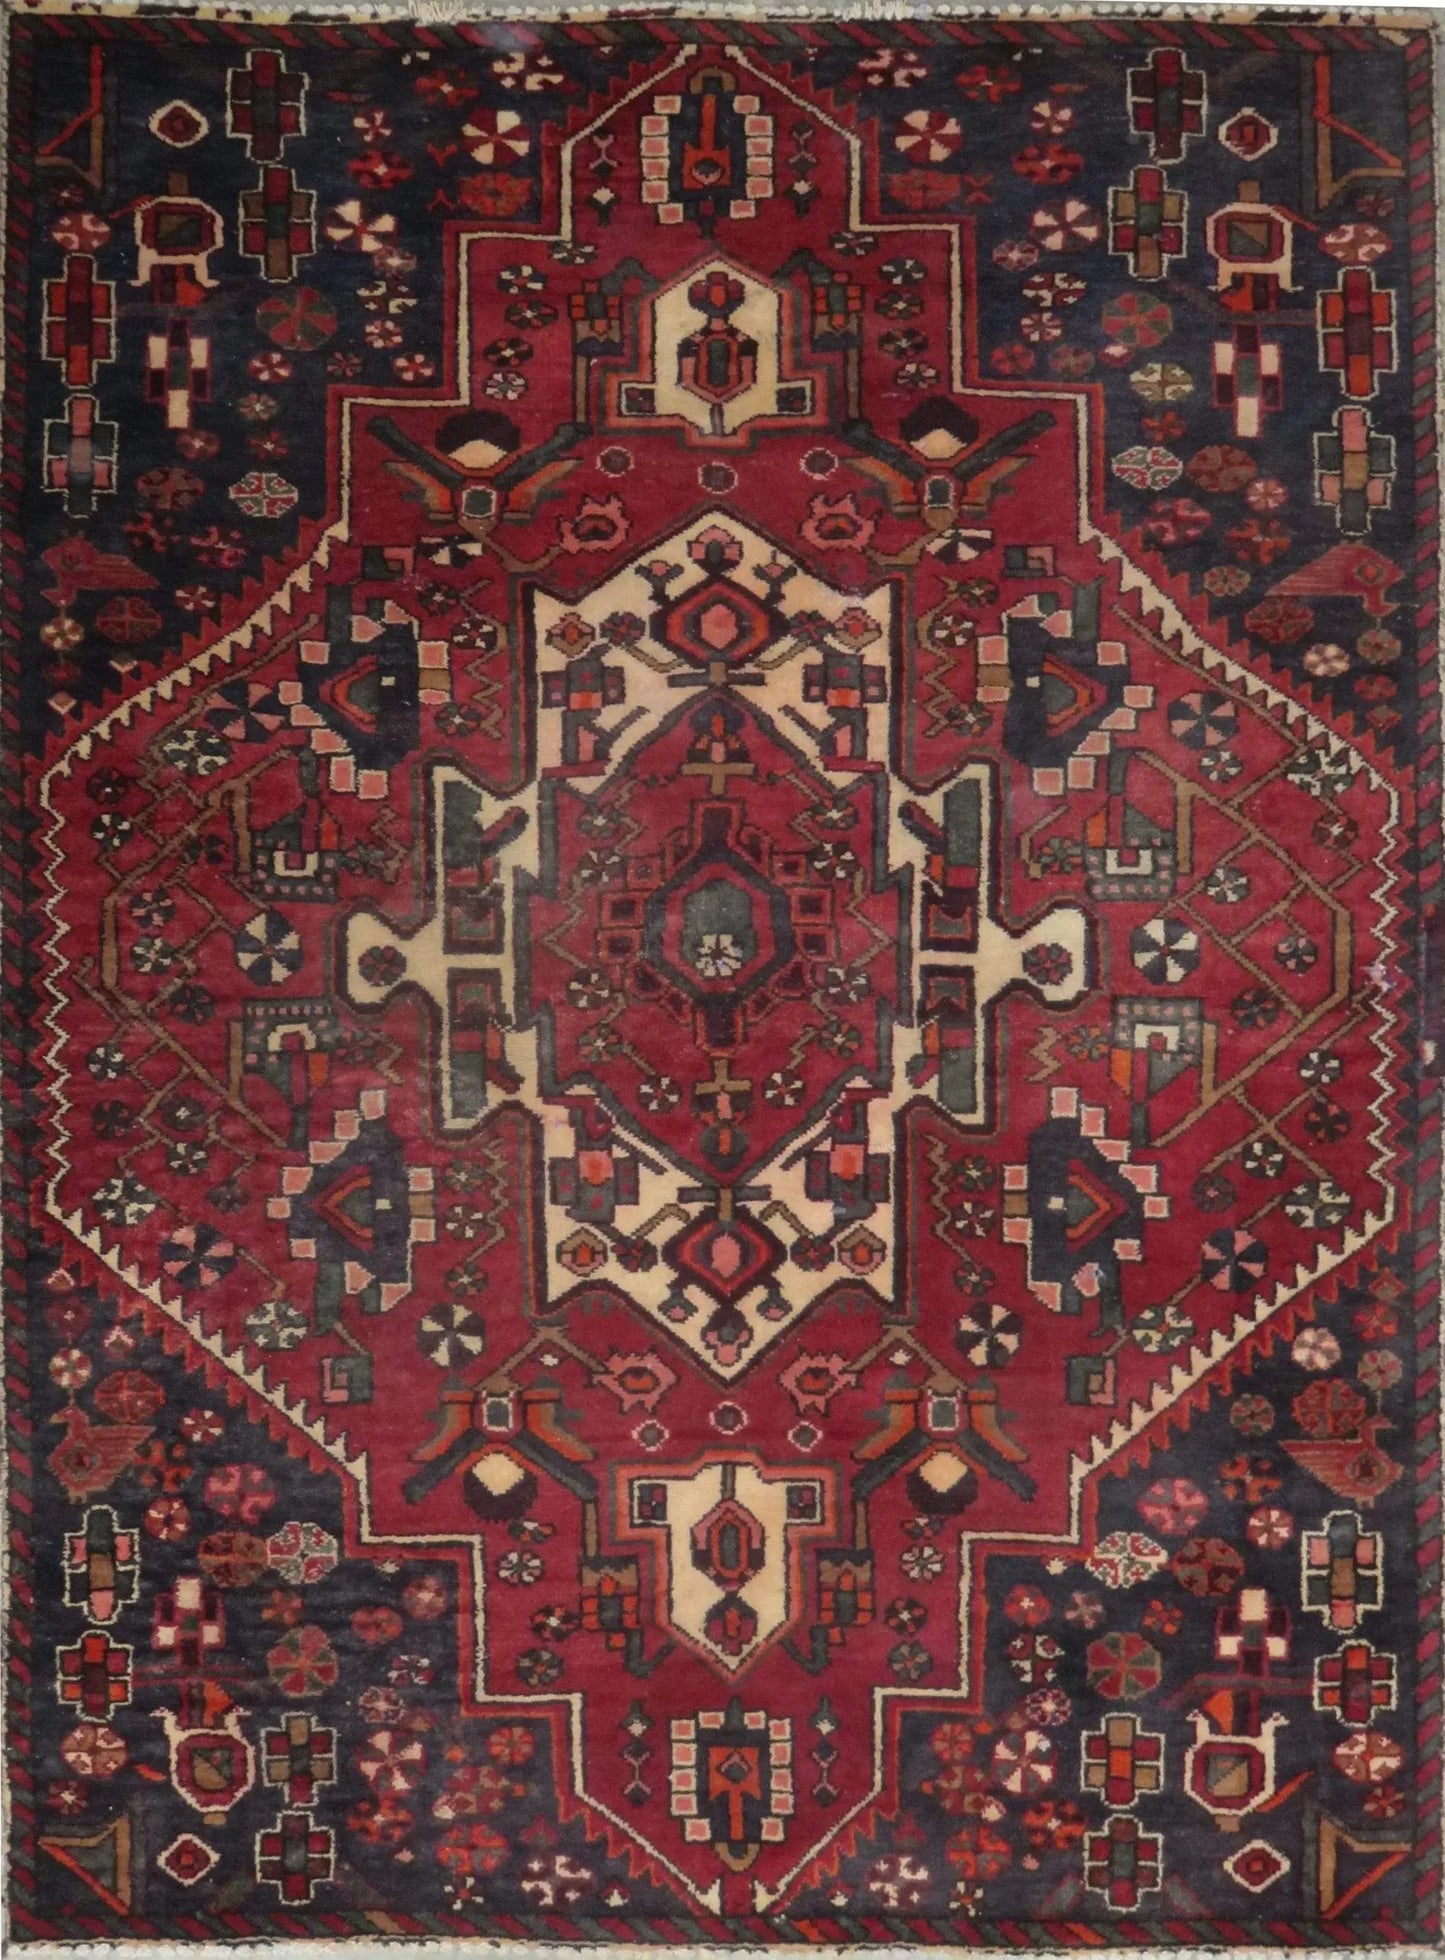 Hand-Knotted Persian Wool Rug _ Luxurious Vintage Design, 5'9" x 4'4", Artisan Crafted